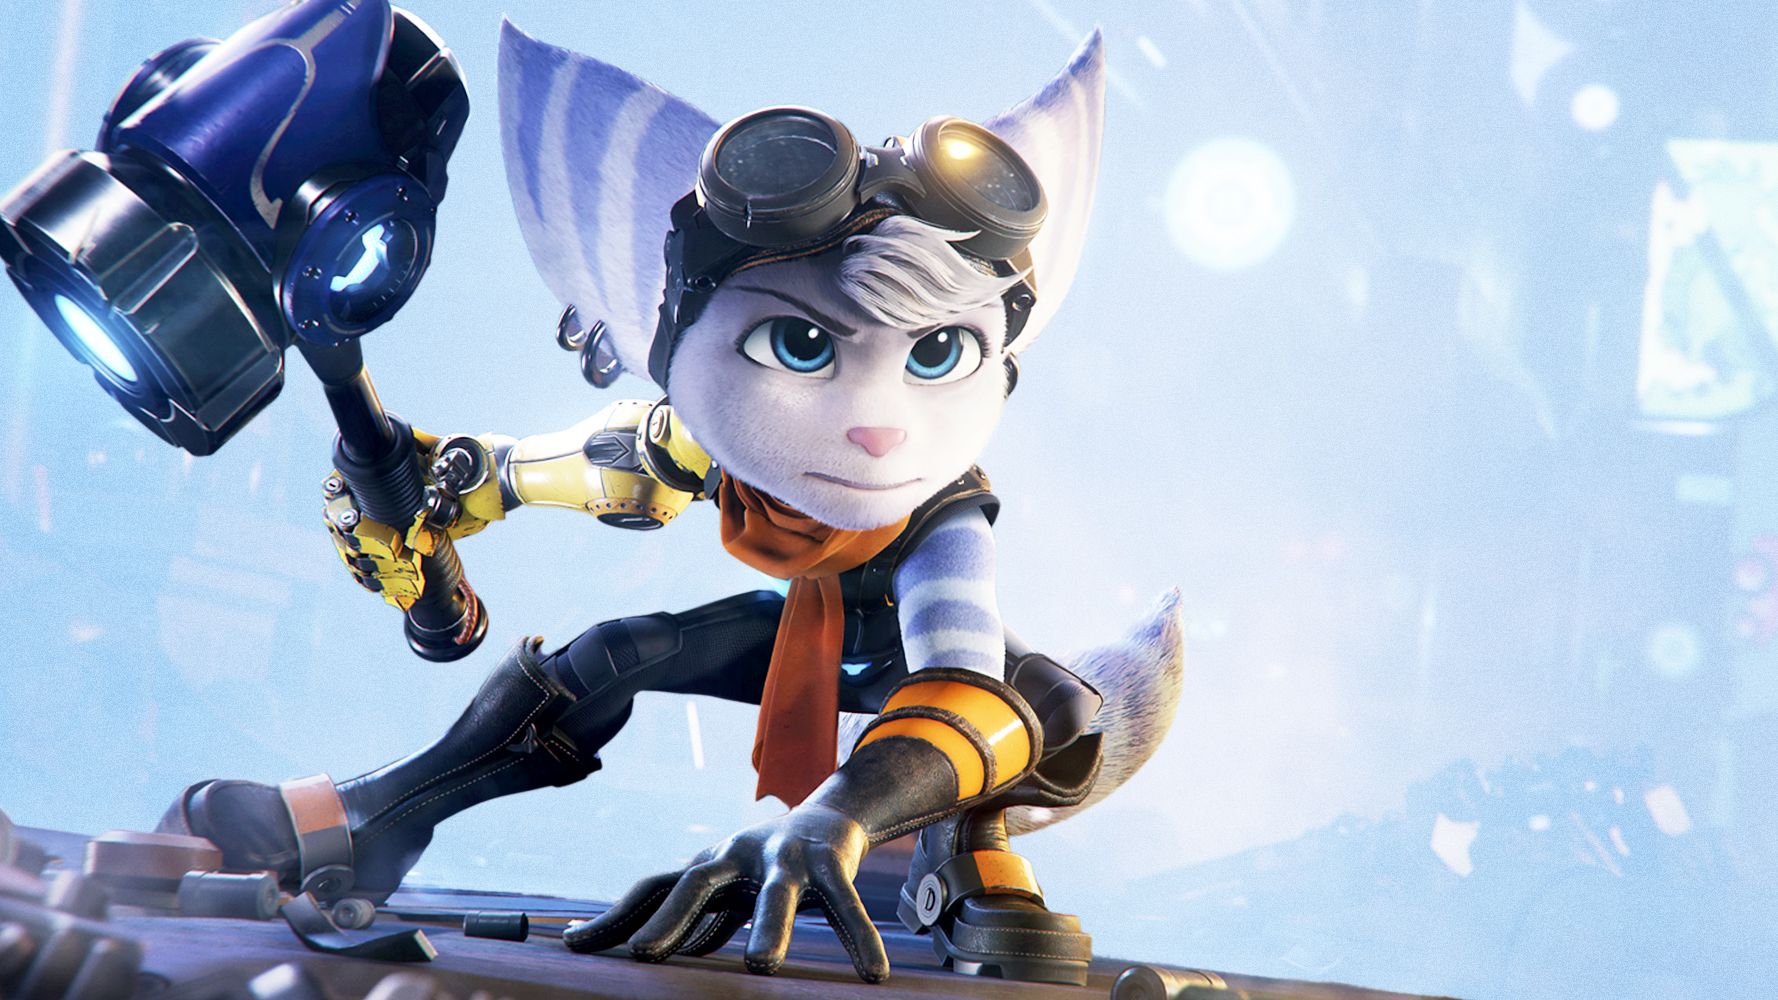 Ratchet & Clank is coming to PS4 with impressive next gen visuals